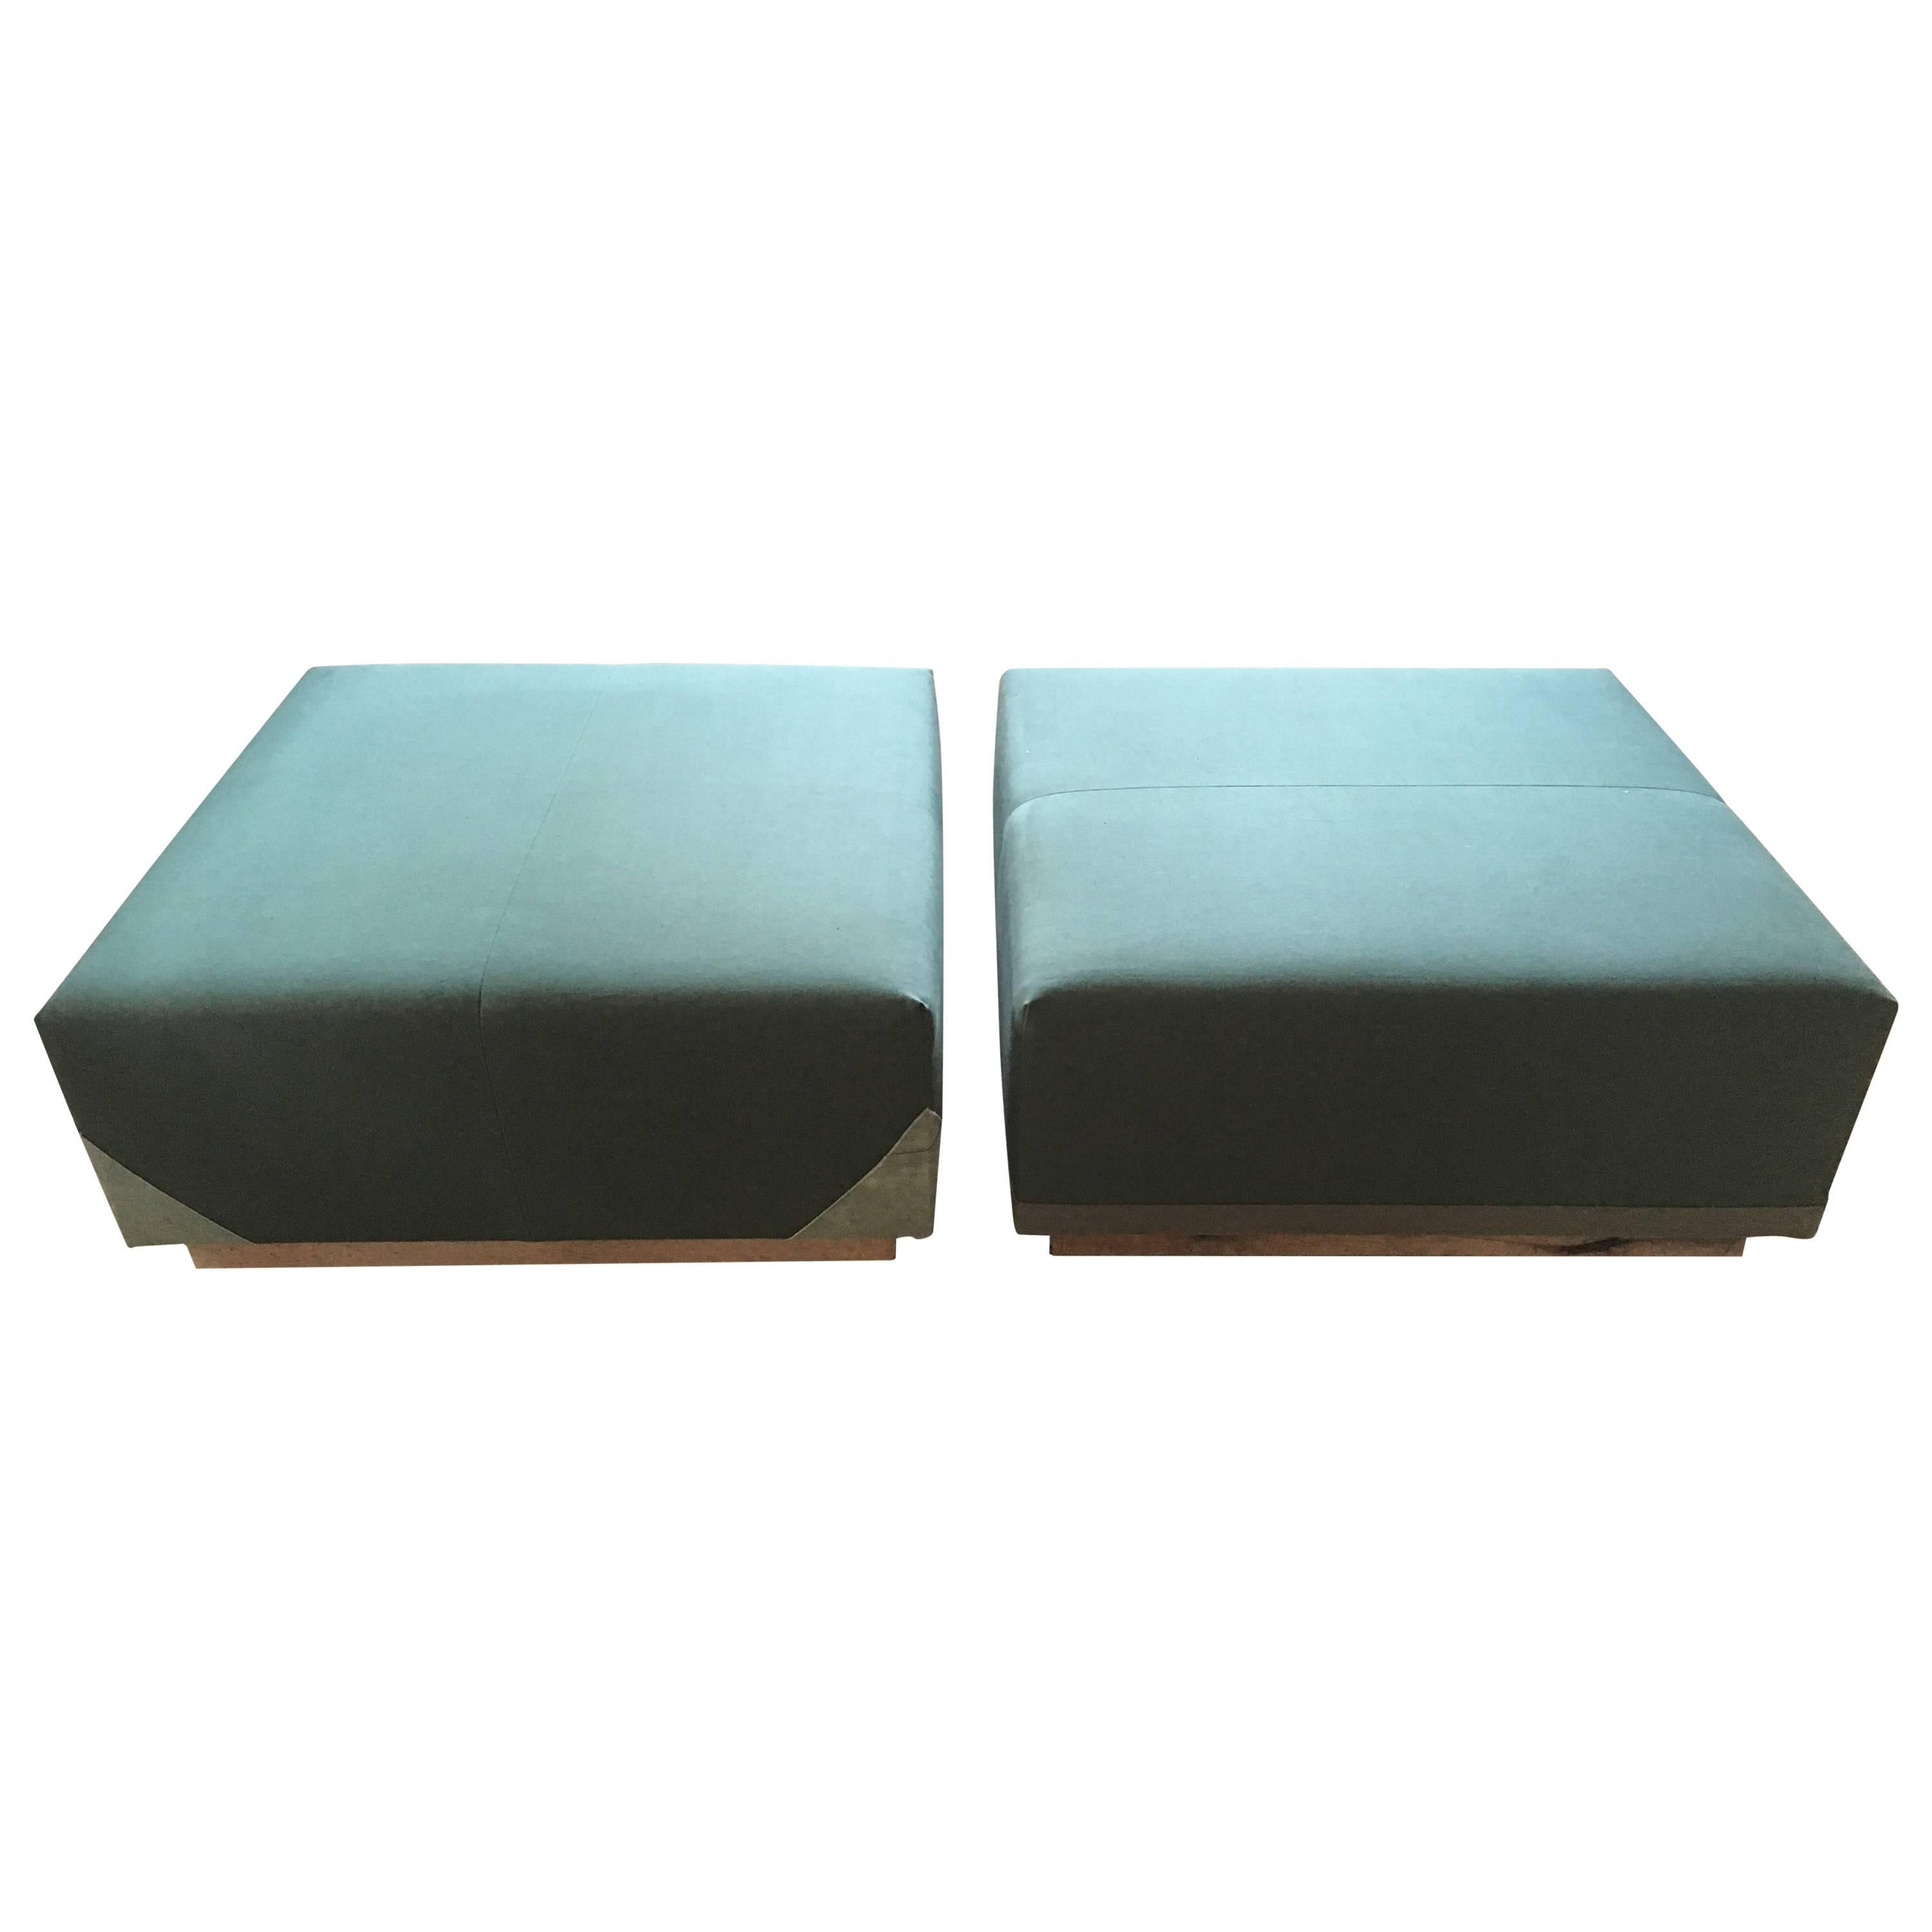 Coffee Table Ottomans Upholstered in Green Canvas on Custom Frame, Pair